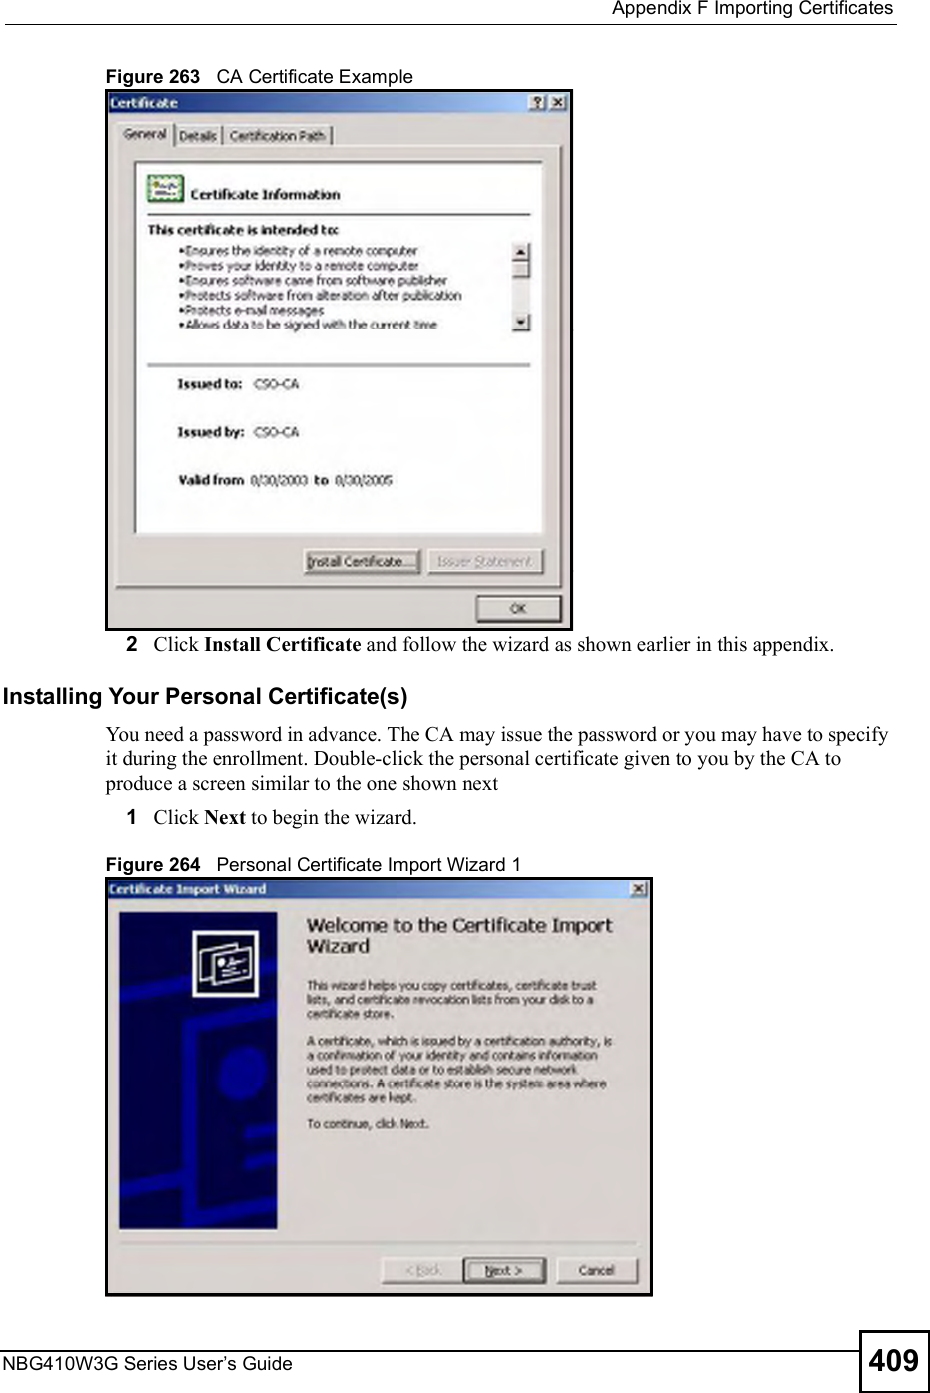  Appendix FImporting CertificatesNBG410W3G Series User s Guide 409Figure 263   CA Certificate Example2Click Install Certificate and follow the wizard as shown earlier in this appendix.Installing Your Personal Certificate(s)You need a password in advance. The CA may issue the password or you may have to specify it during the enrollment. Double-click the personal certificate given to you by the CA to produce a screen similar to the one shown next1Click Next to begin the wizard.Figure 264   Personal Certificate Import Wizard 1